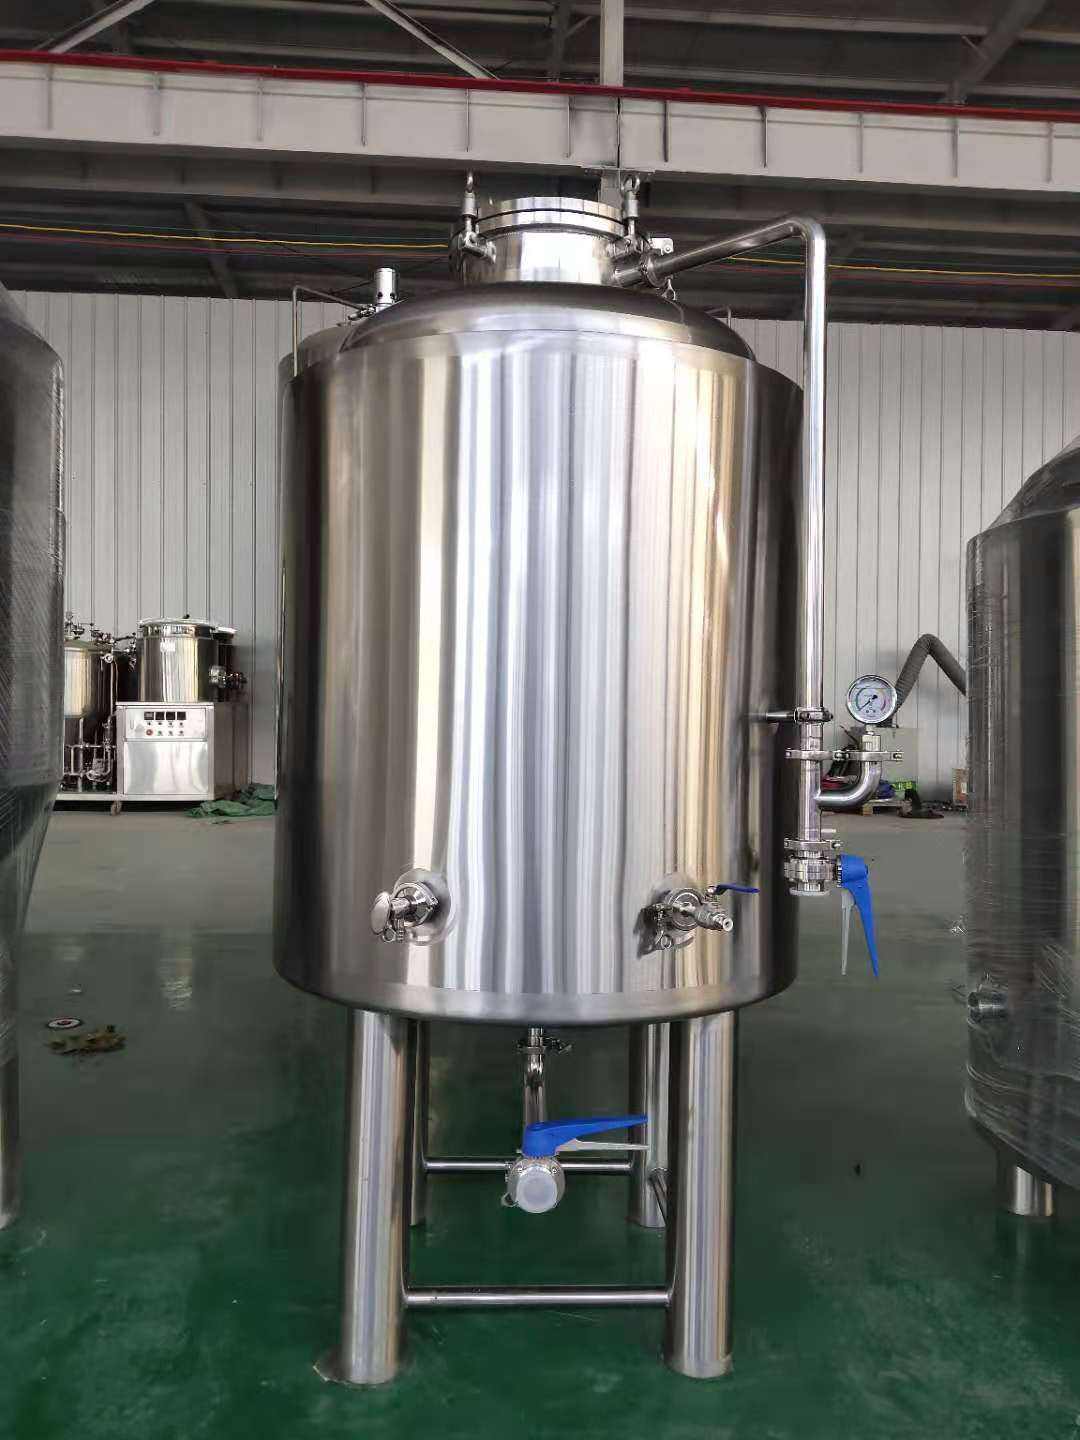 Flange Manhole Bright Beer Tanks With Good Quality